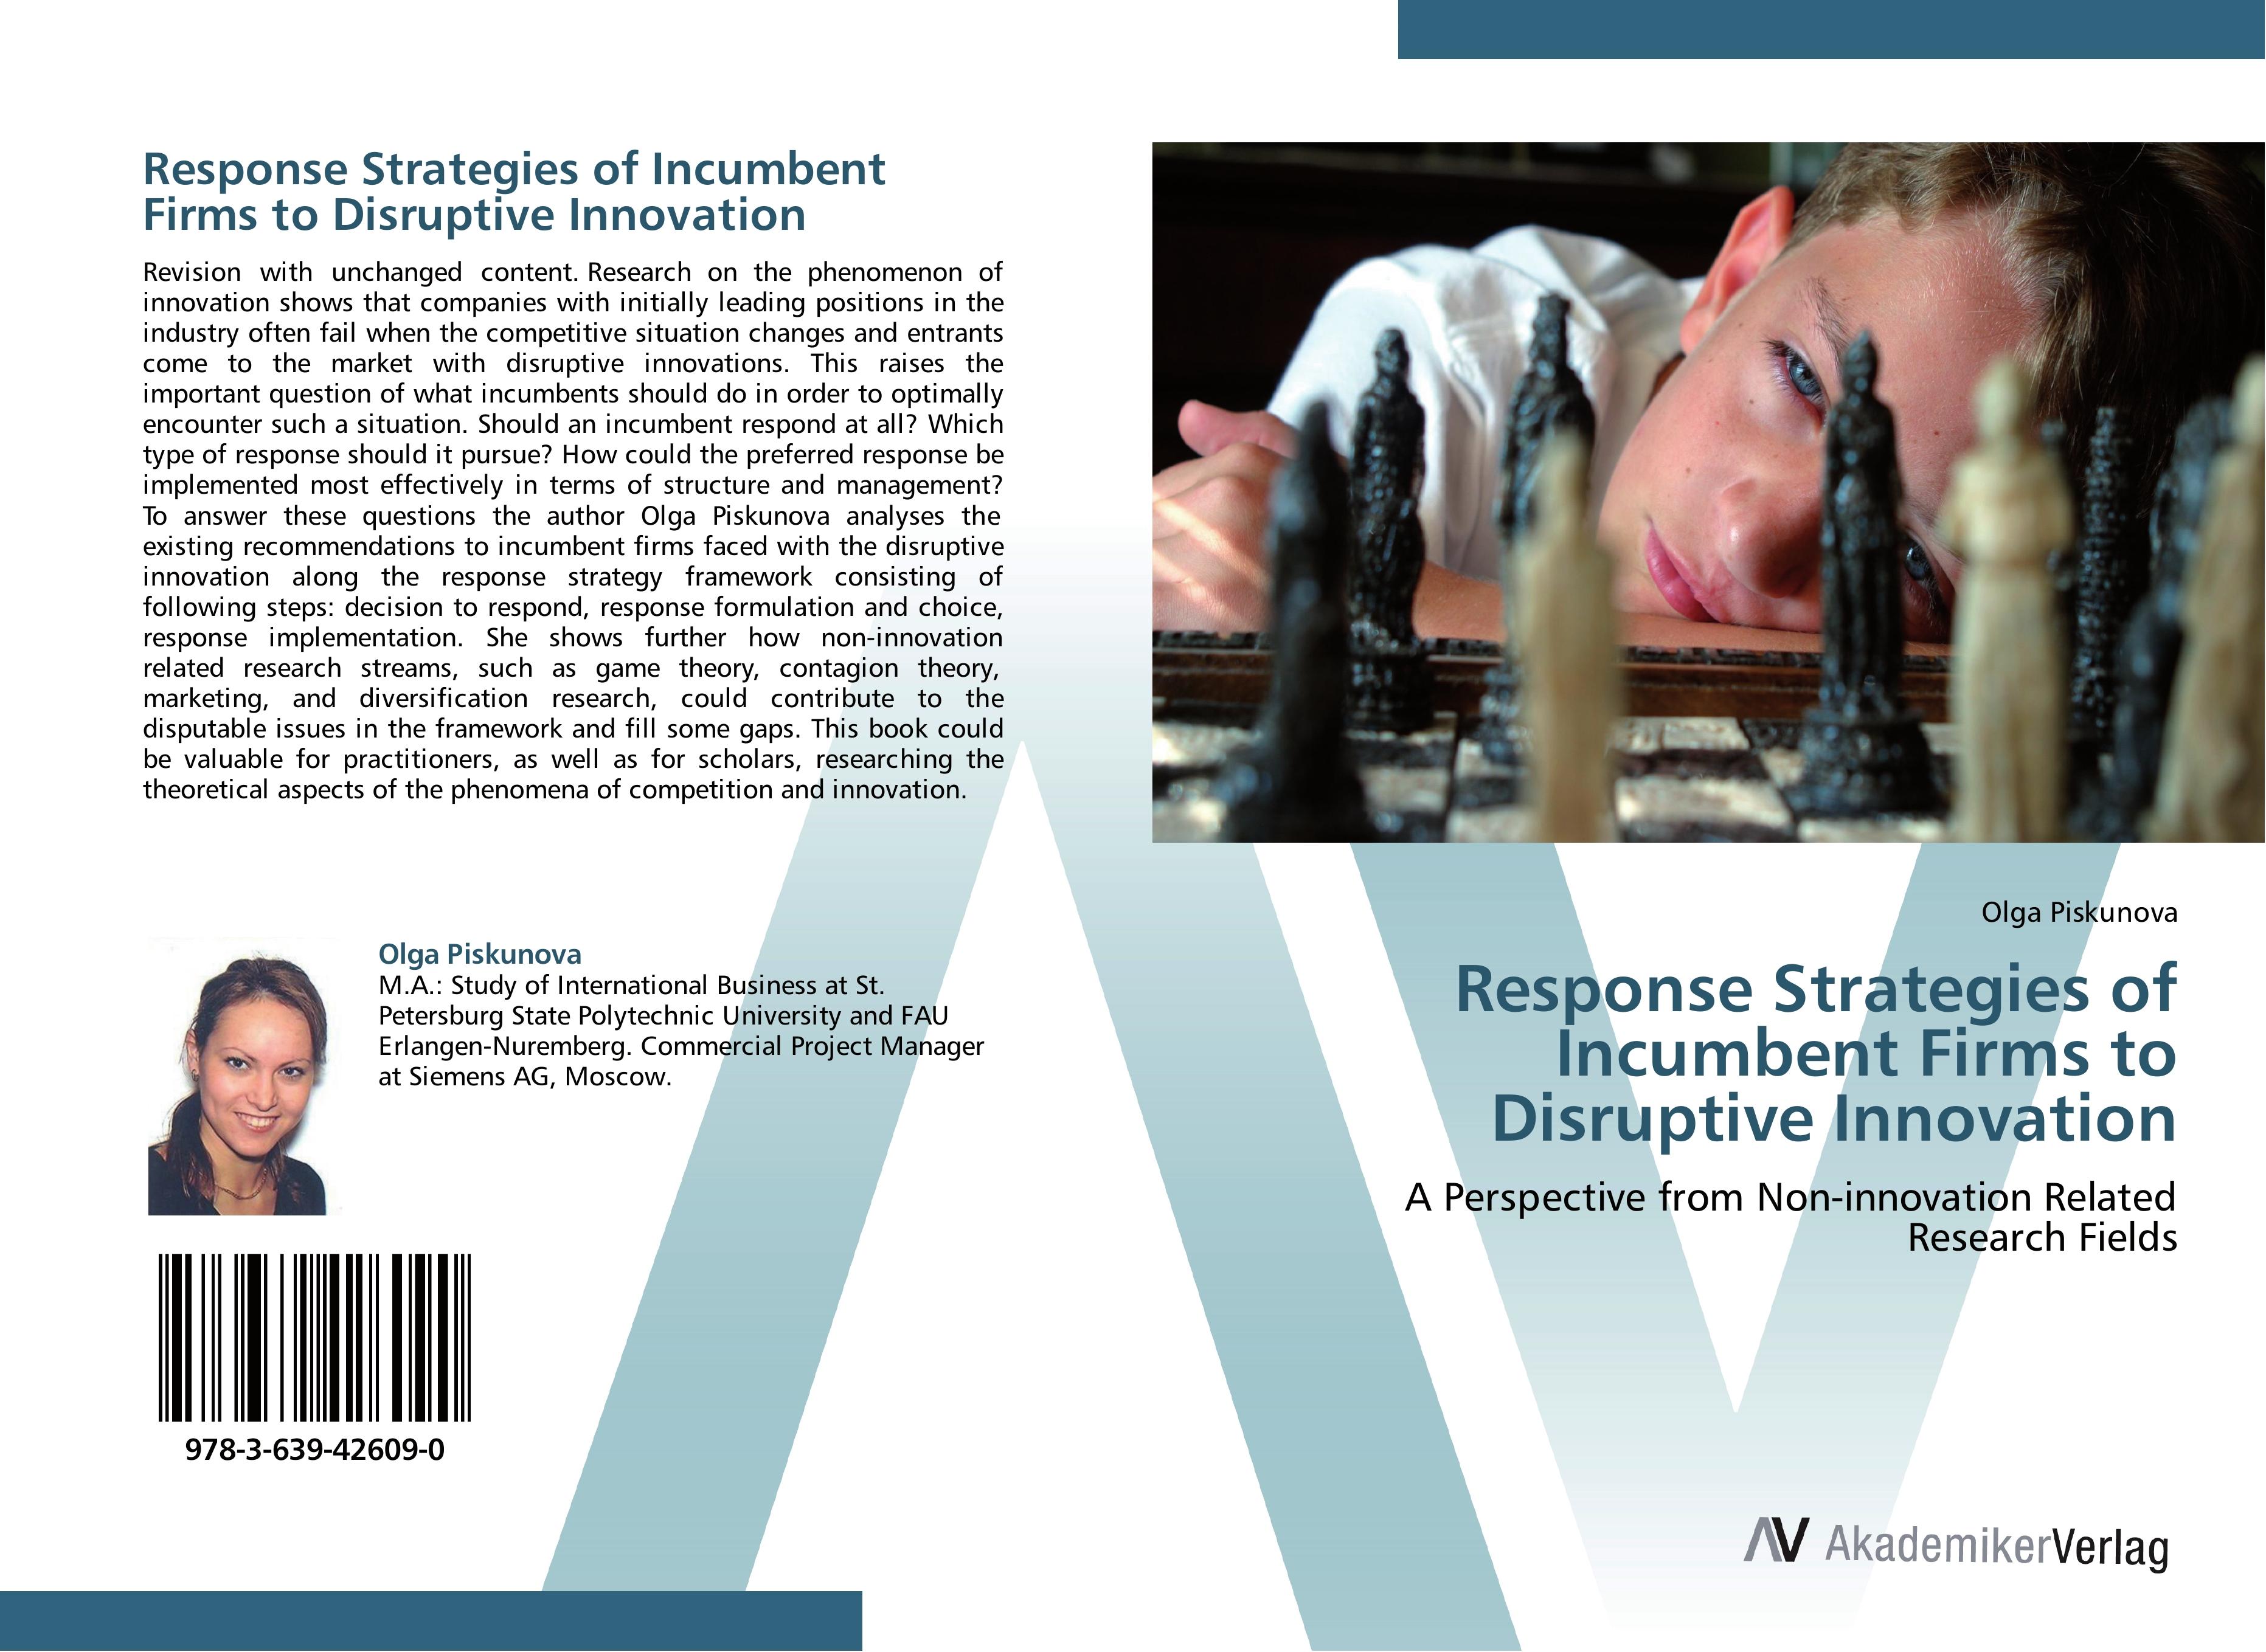 Response Strategies of Incumbent Firms to Disruptive Innovation  A Perspective from Non-innovation Related Research Fields  Olga Piskunova  Taschenbuch  Paperback  Englisch  2012 - Piskunova, Olga